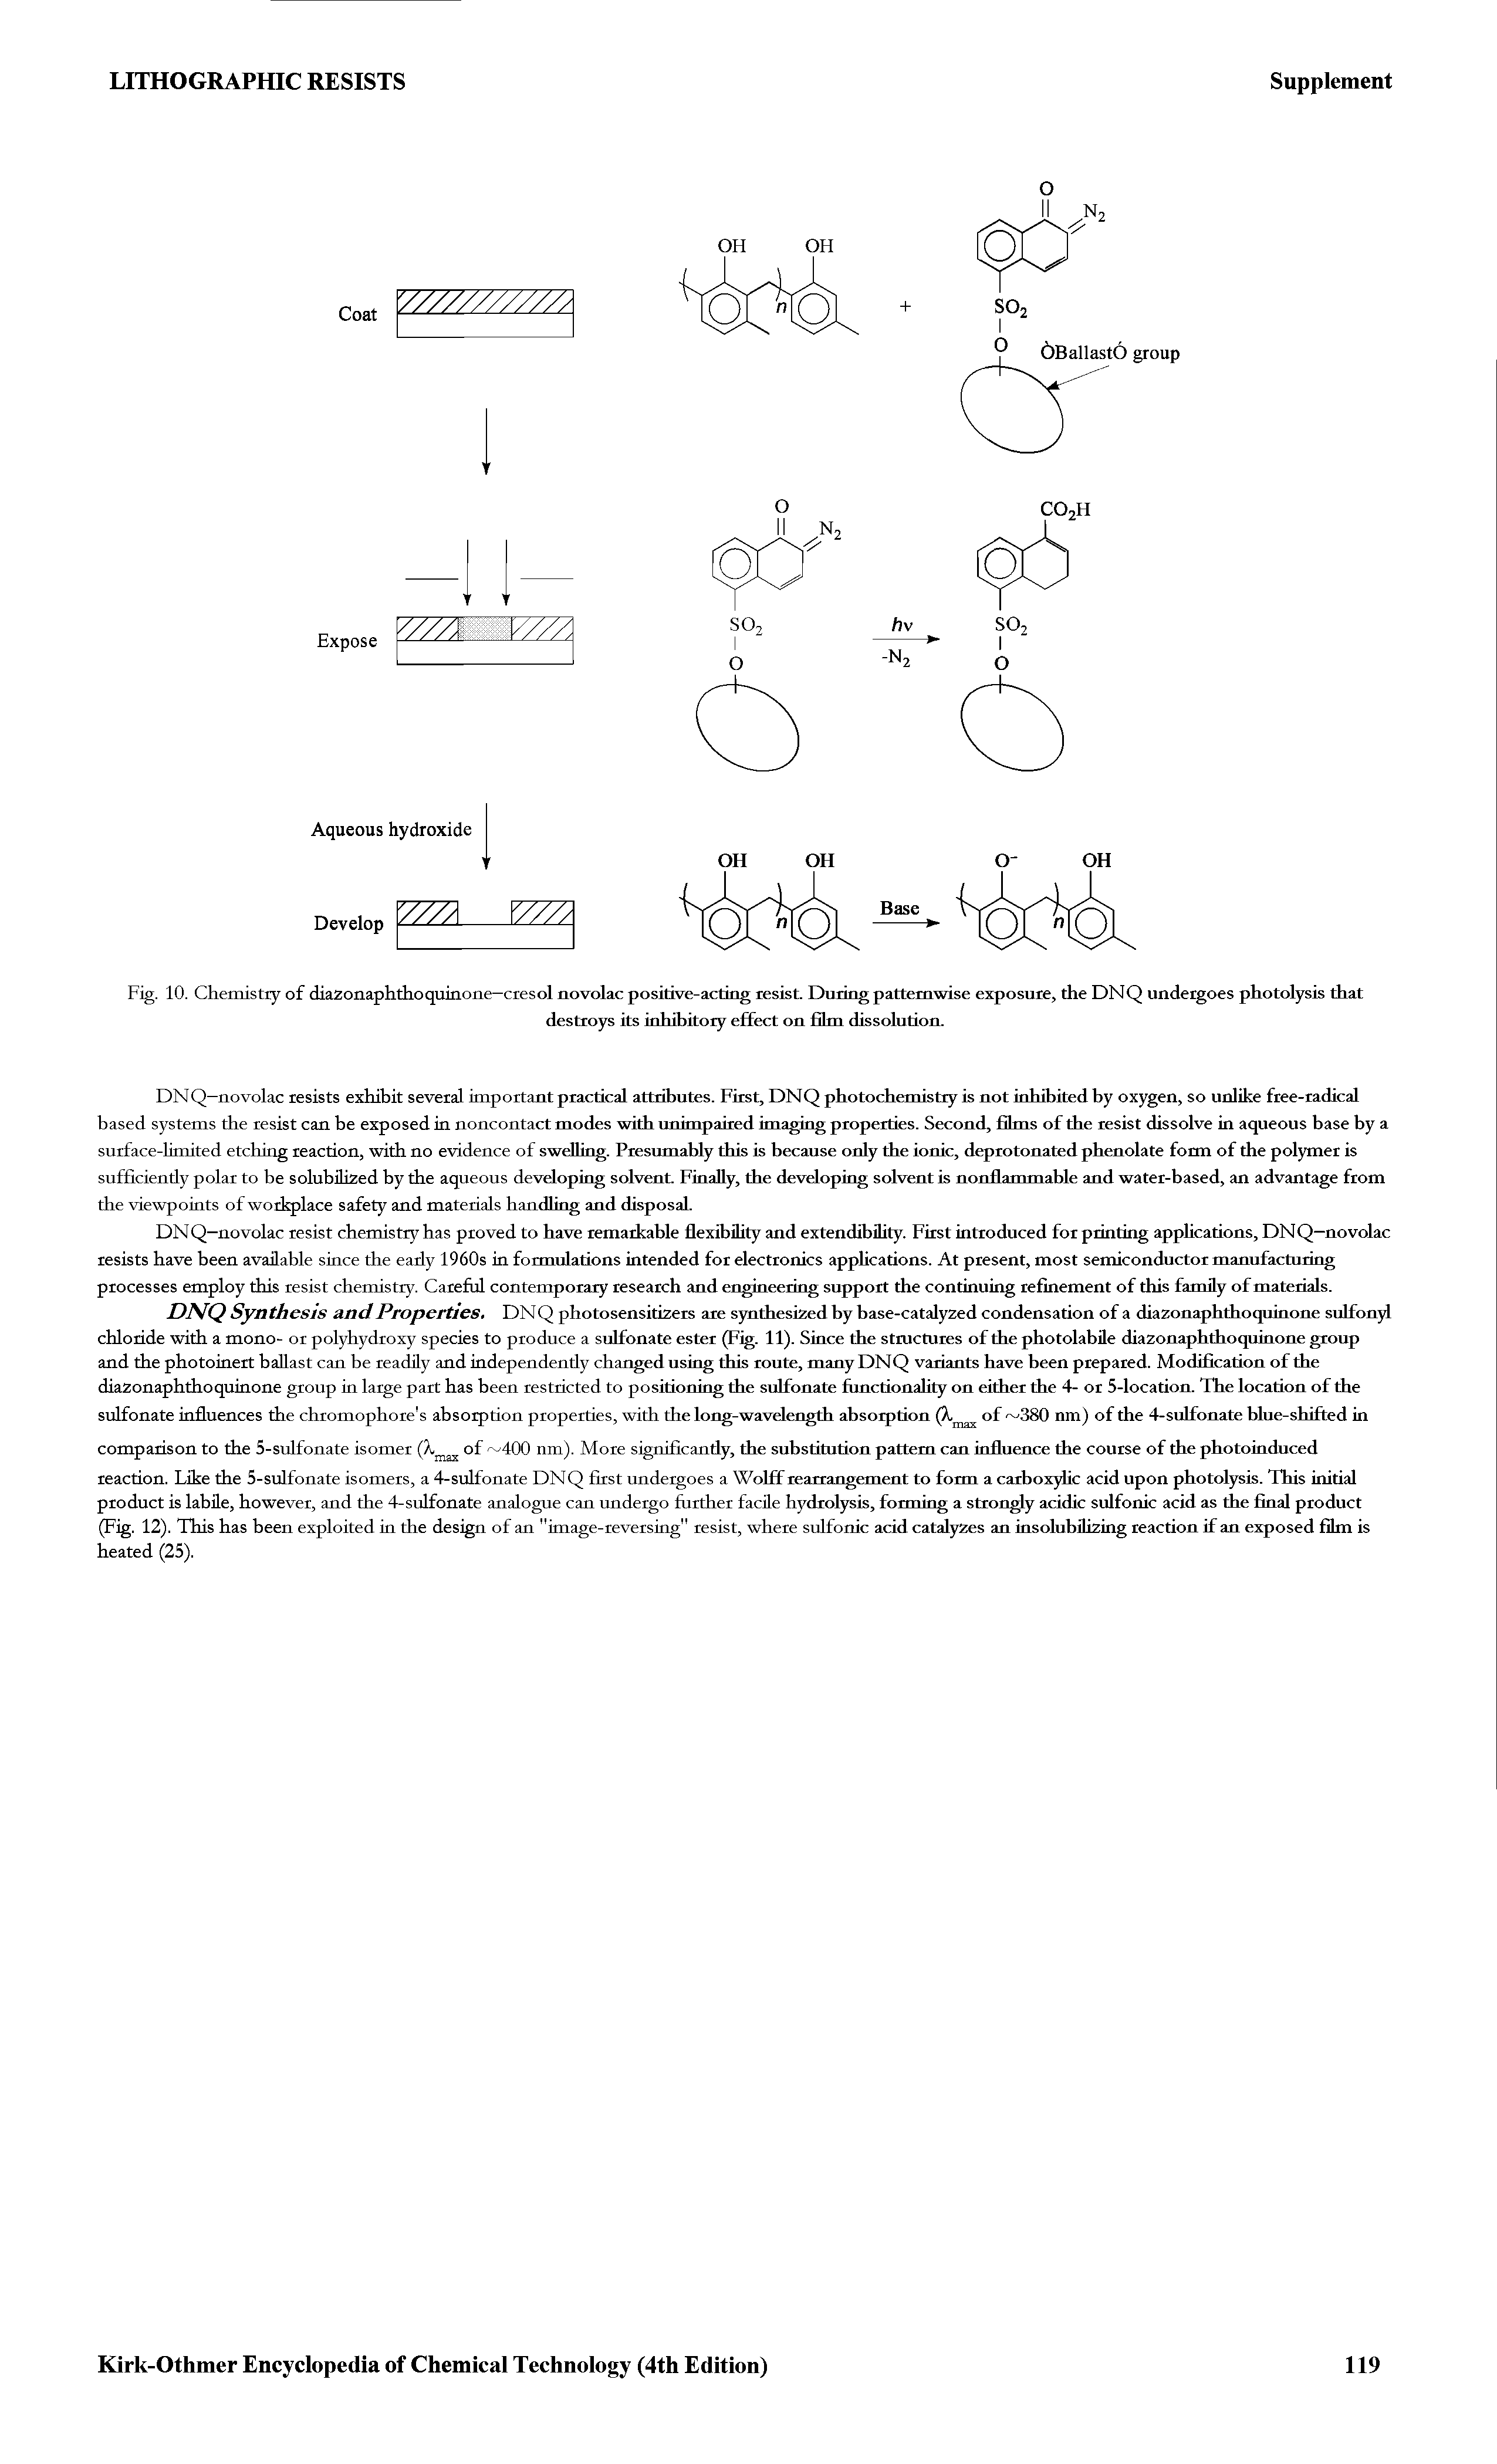 Fig. 10. Chemistry of diazonaphthoquinone—cresol novolac positive-acting resist. During pattemwise exposure, the DNQ undergoes photolysis that...